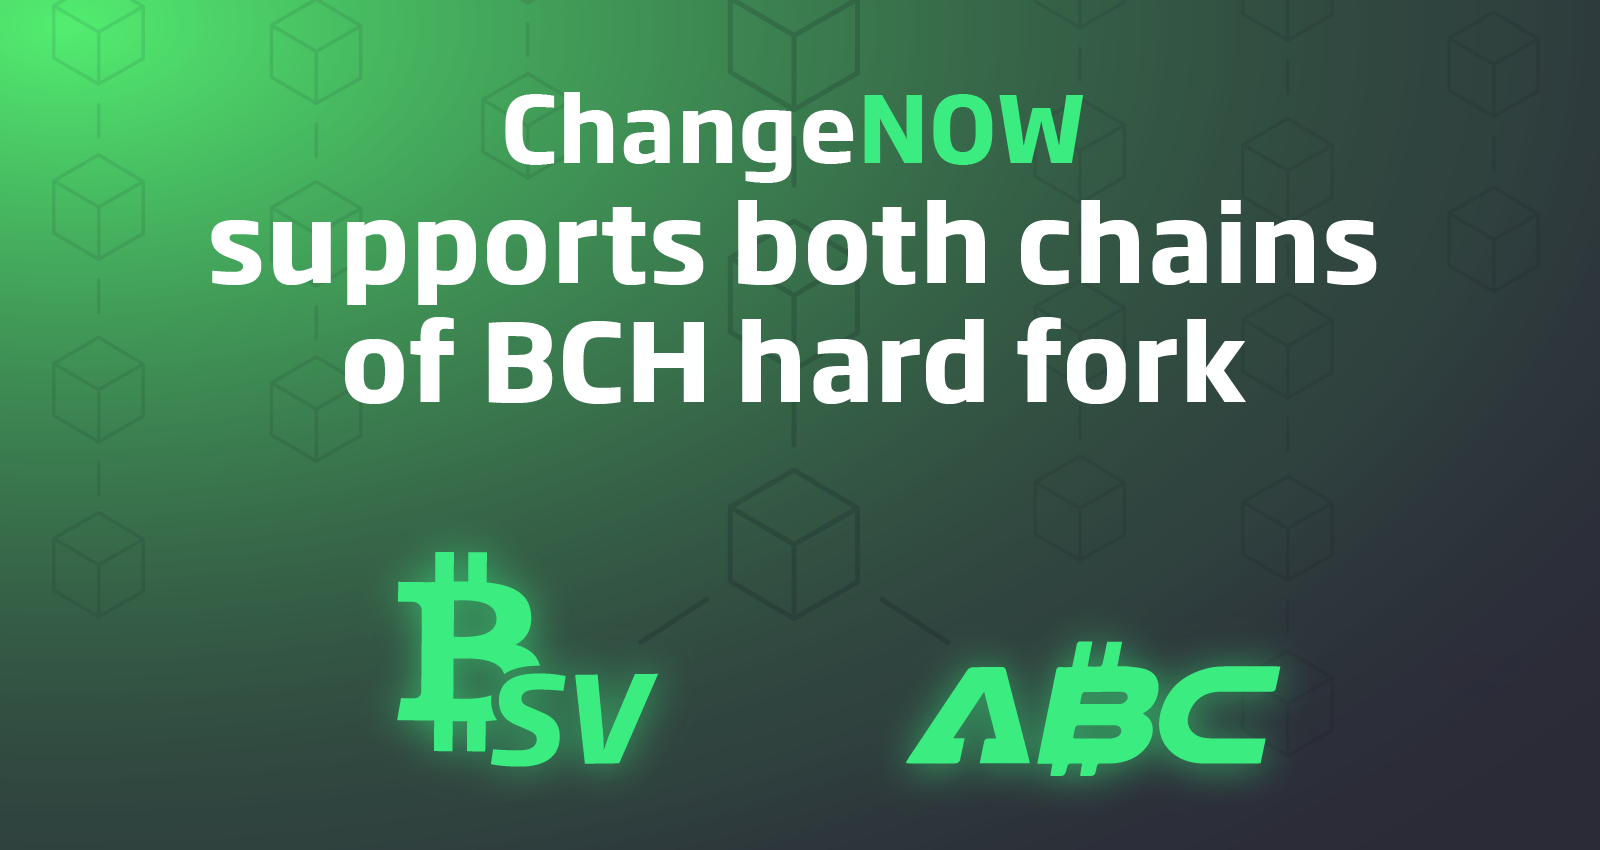 bitcoin cash fork changenow position